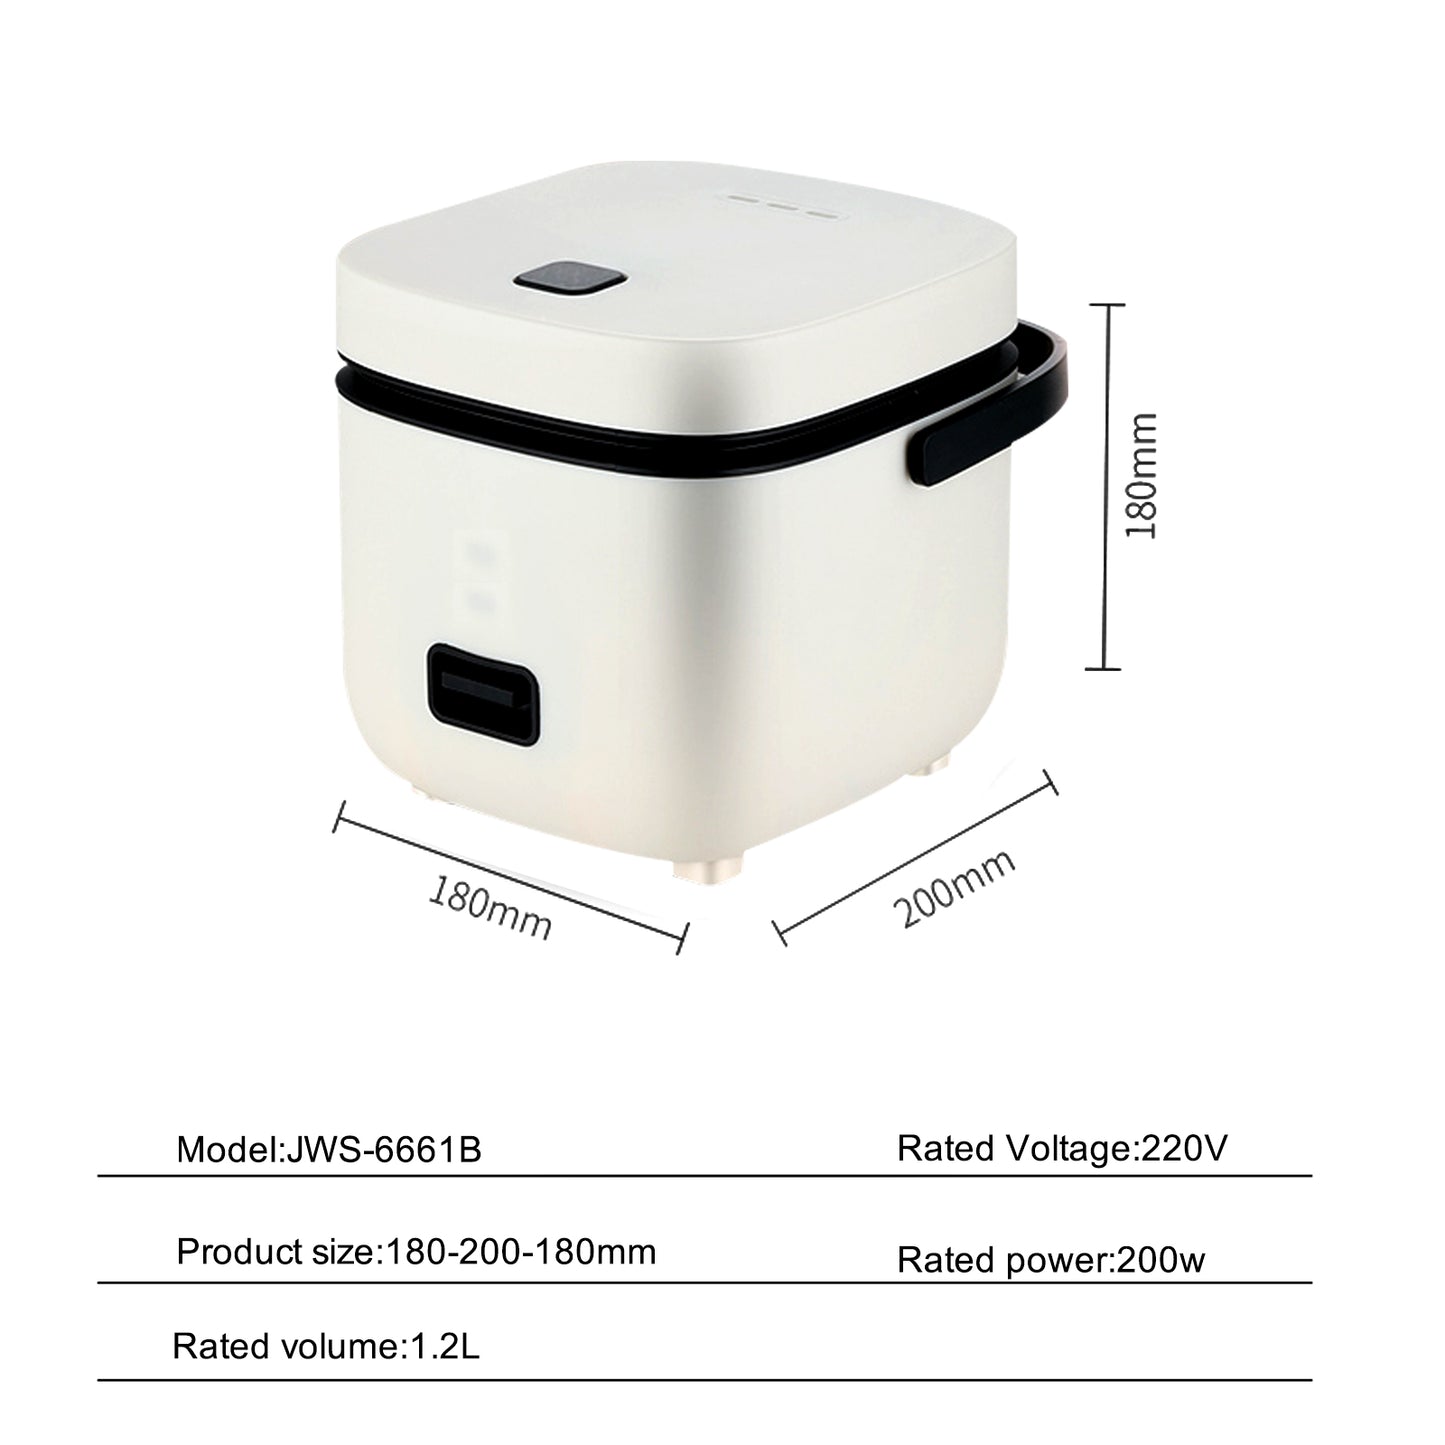 Qoo10 - Brand new 1 litre Buffalo Enco Rice Cooker model no. KW63 one year  war : Small Appliances